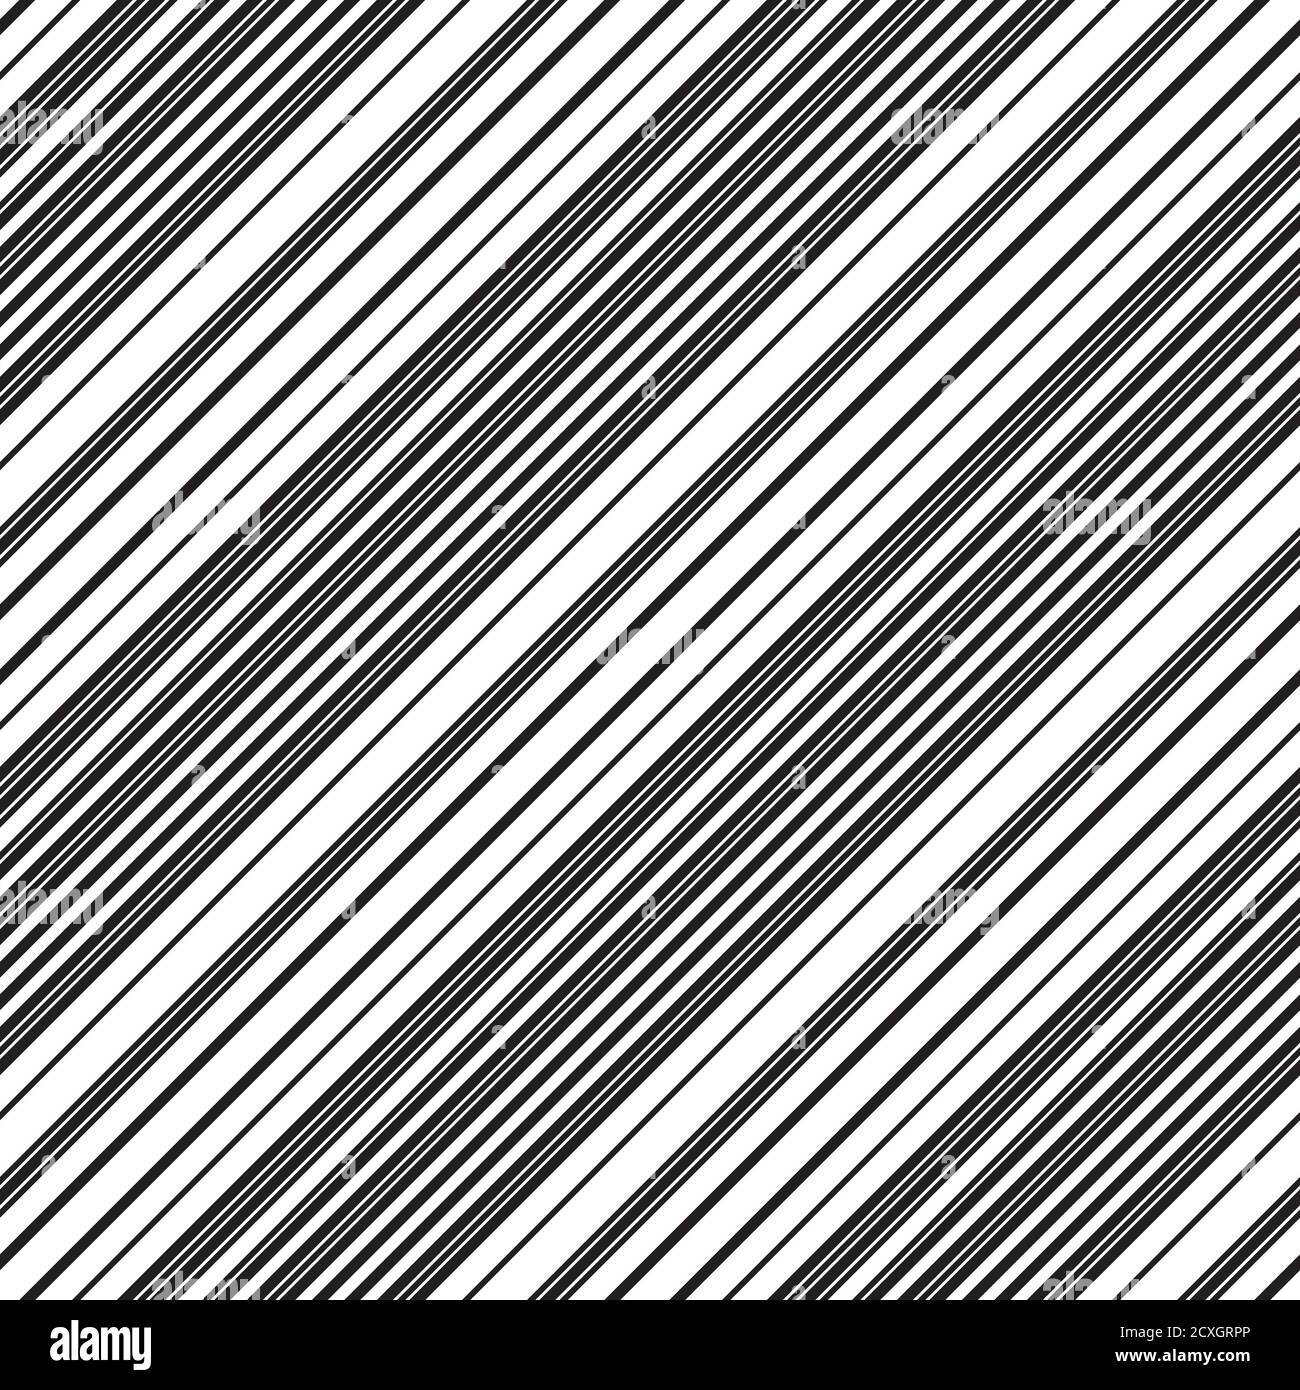 Seamless pattern with oblique black lines Stock Vector